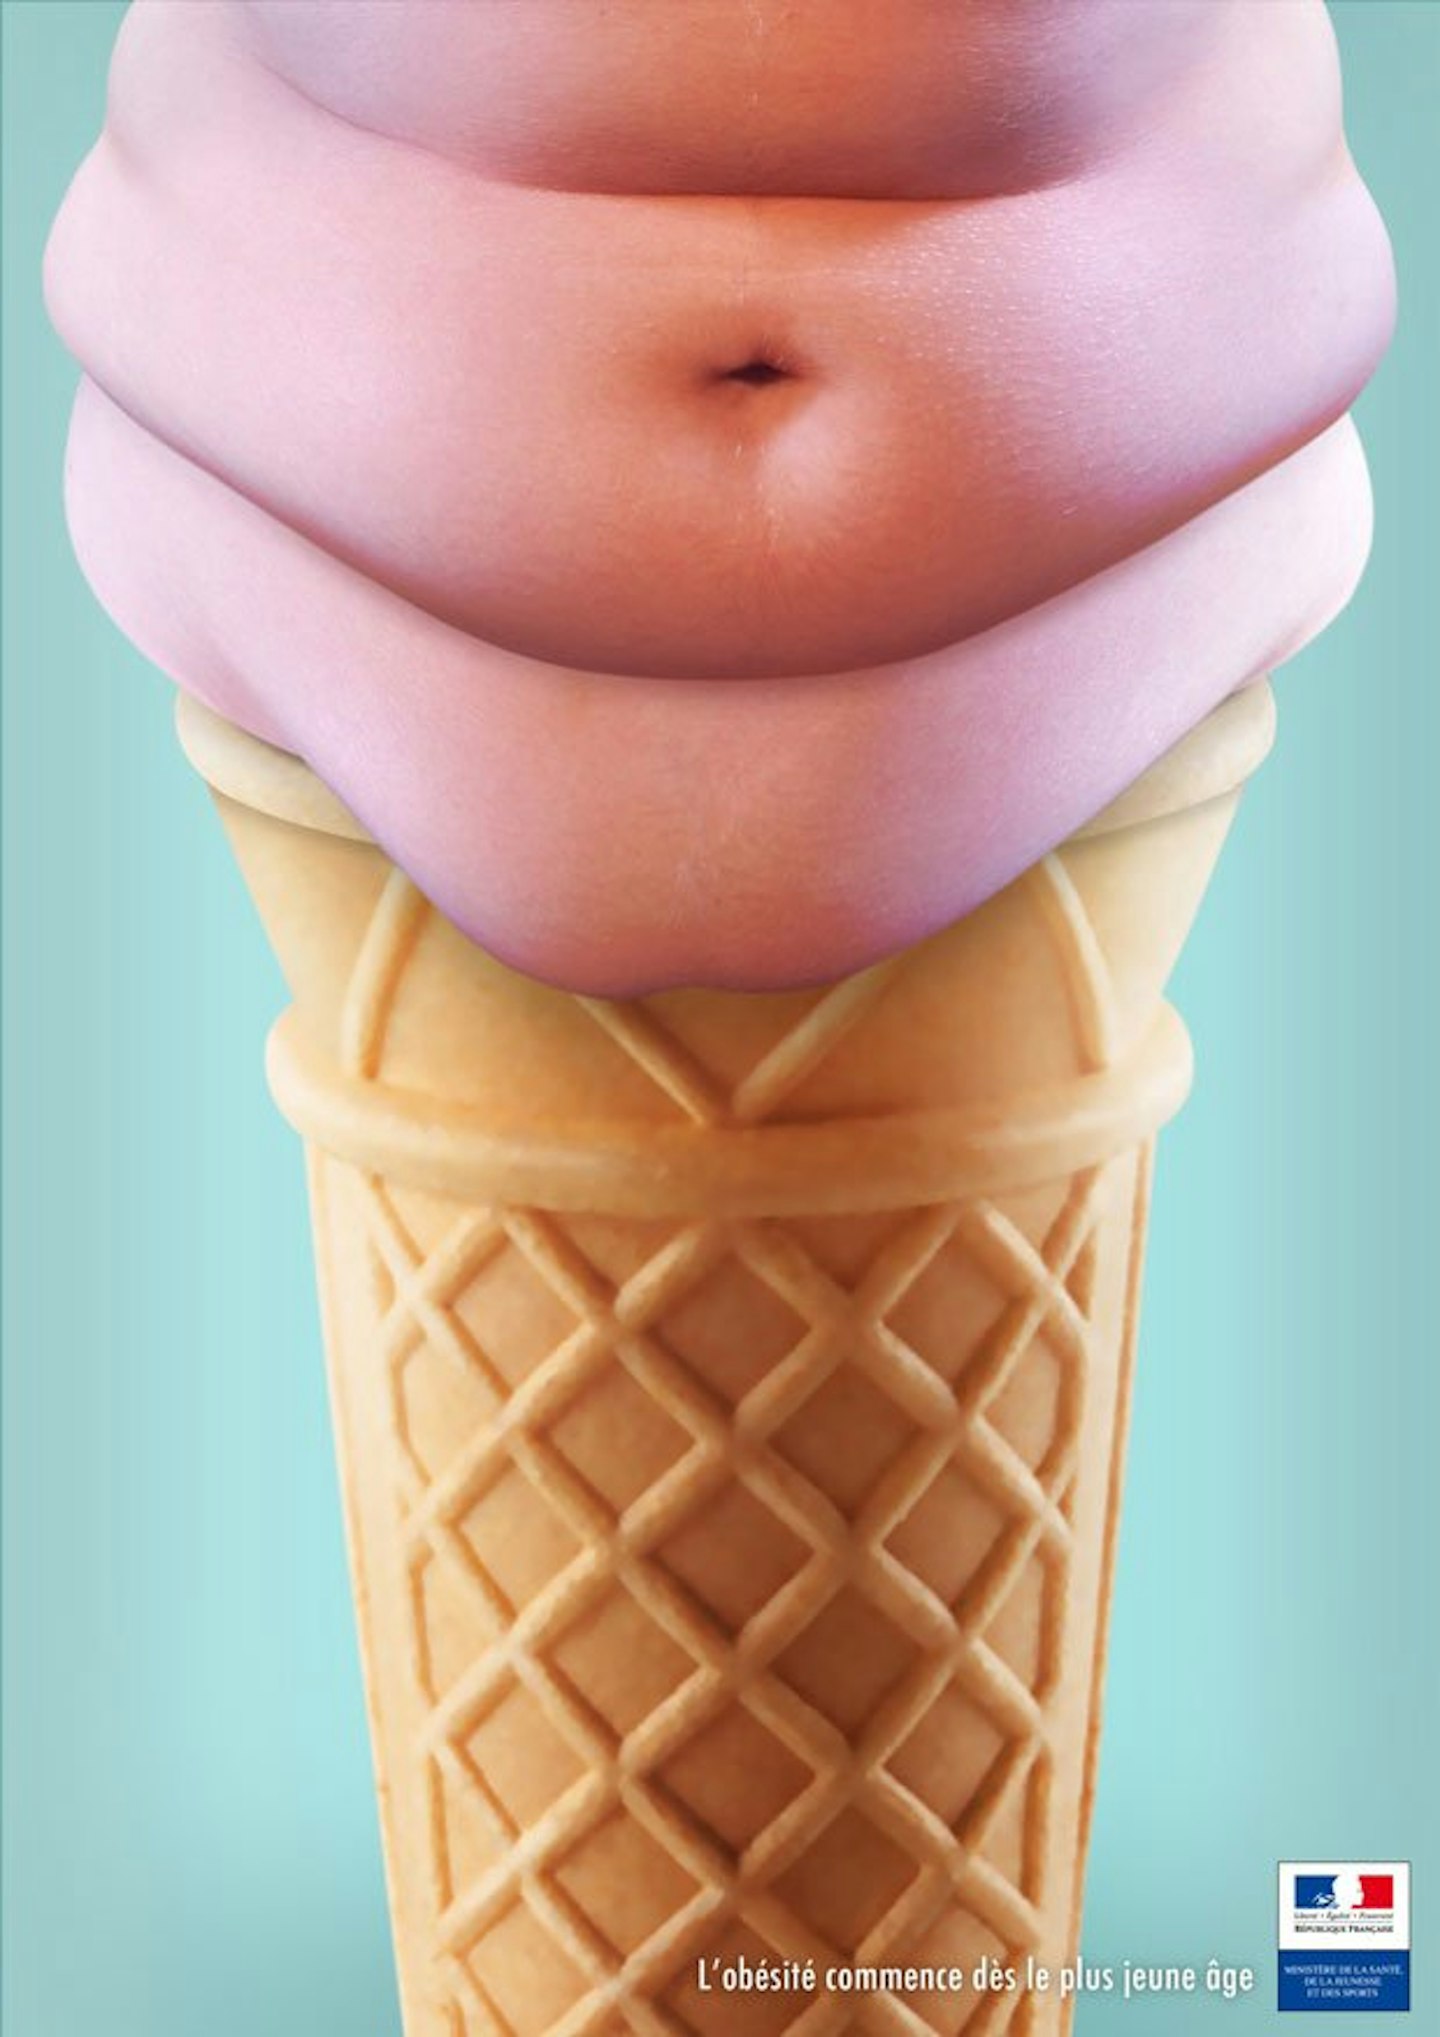 french-ministry-of-health-childhood-obesity-awareness2